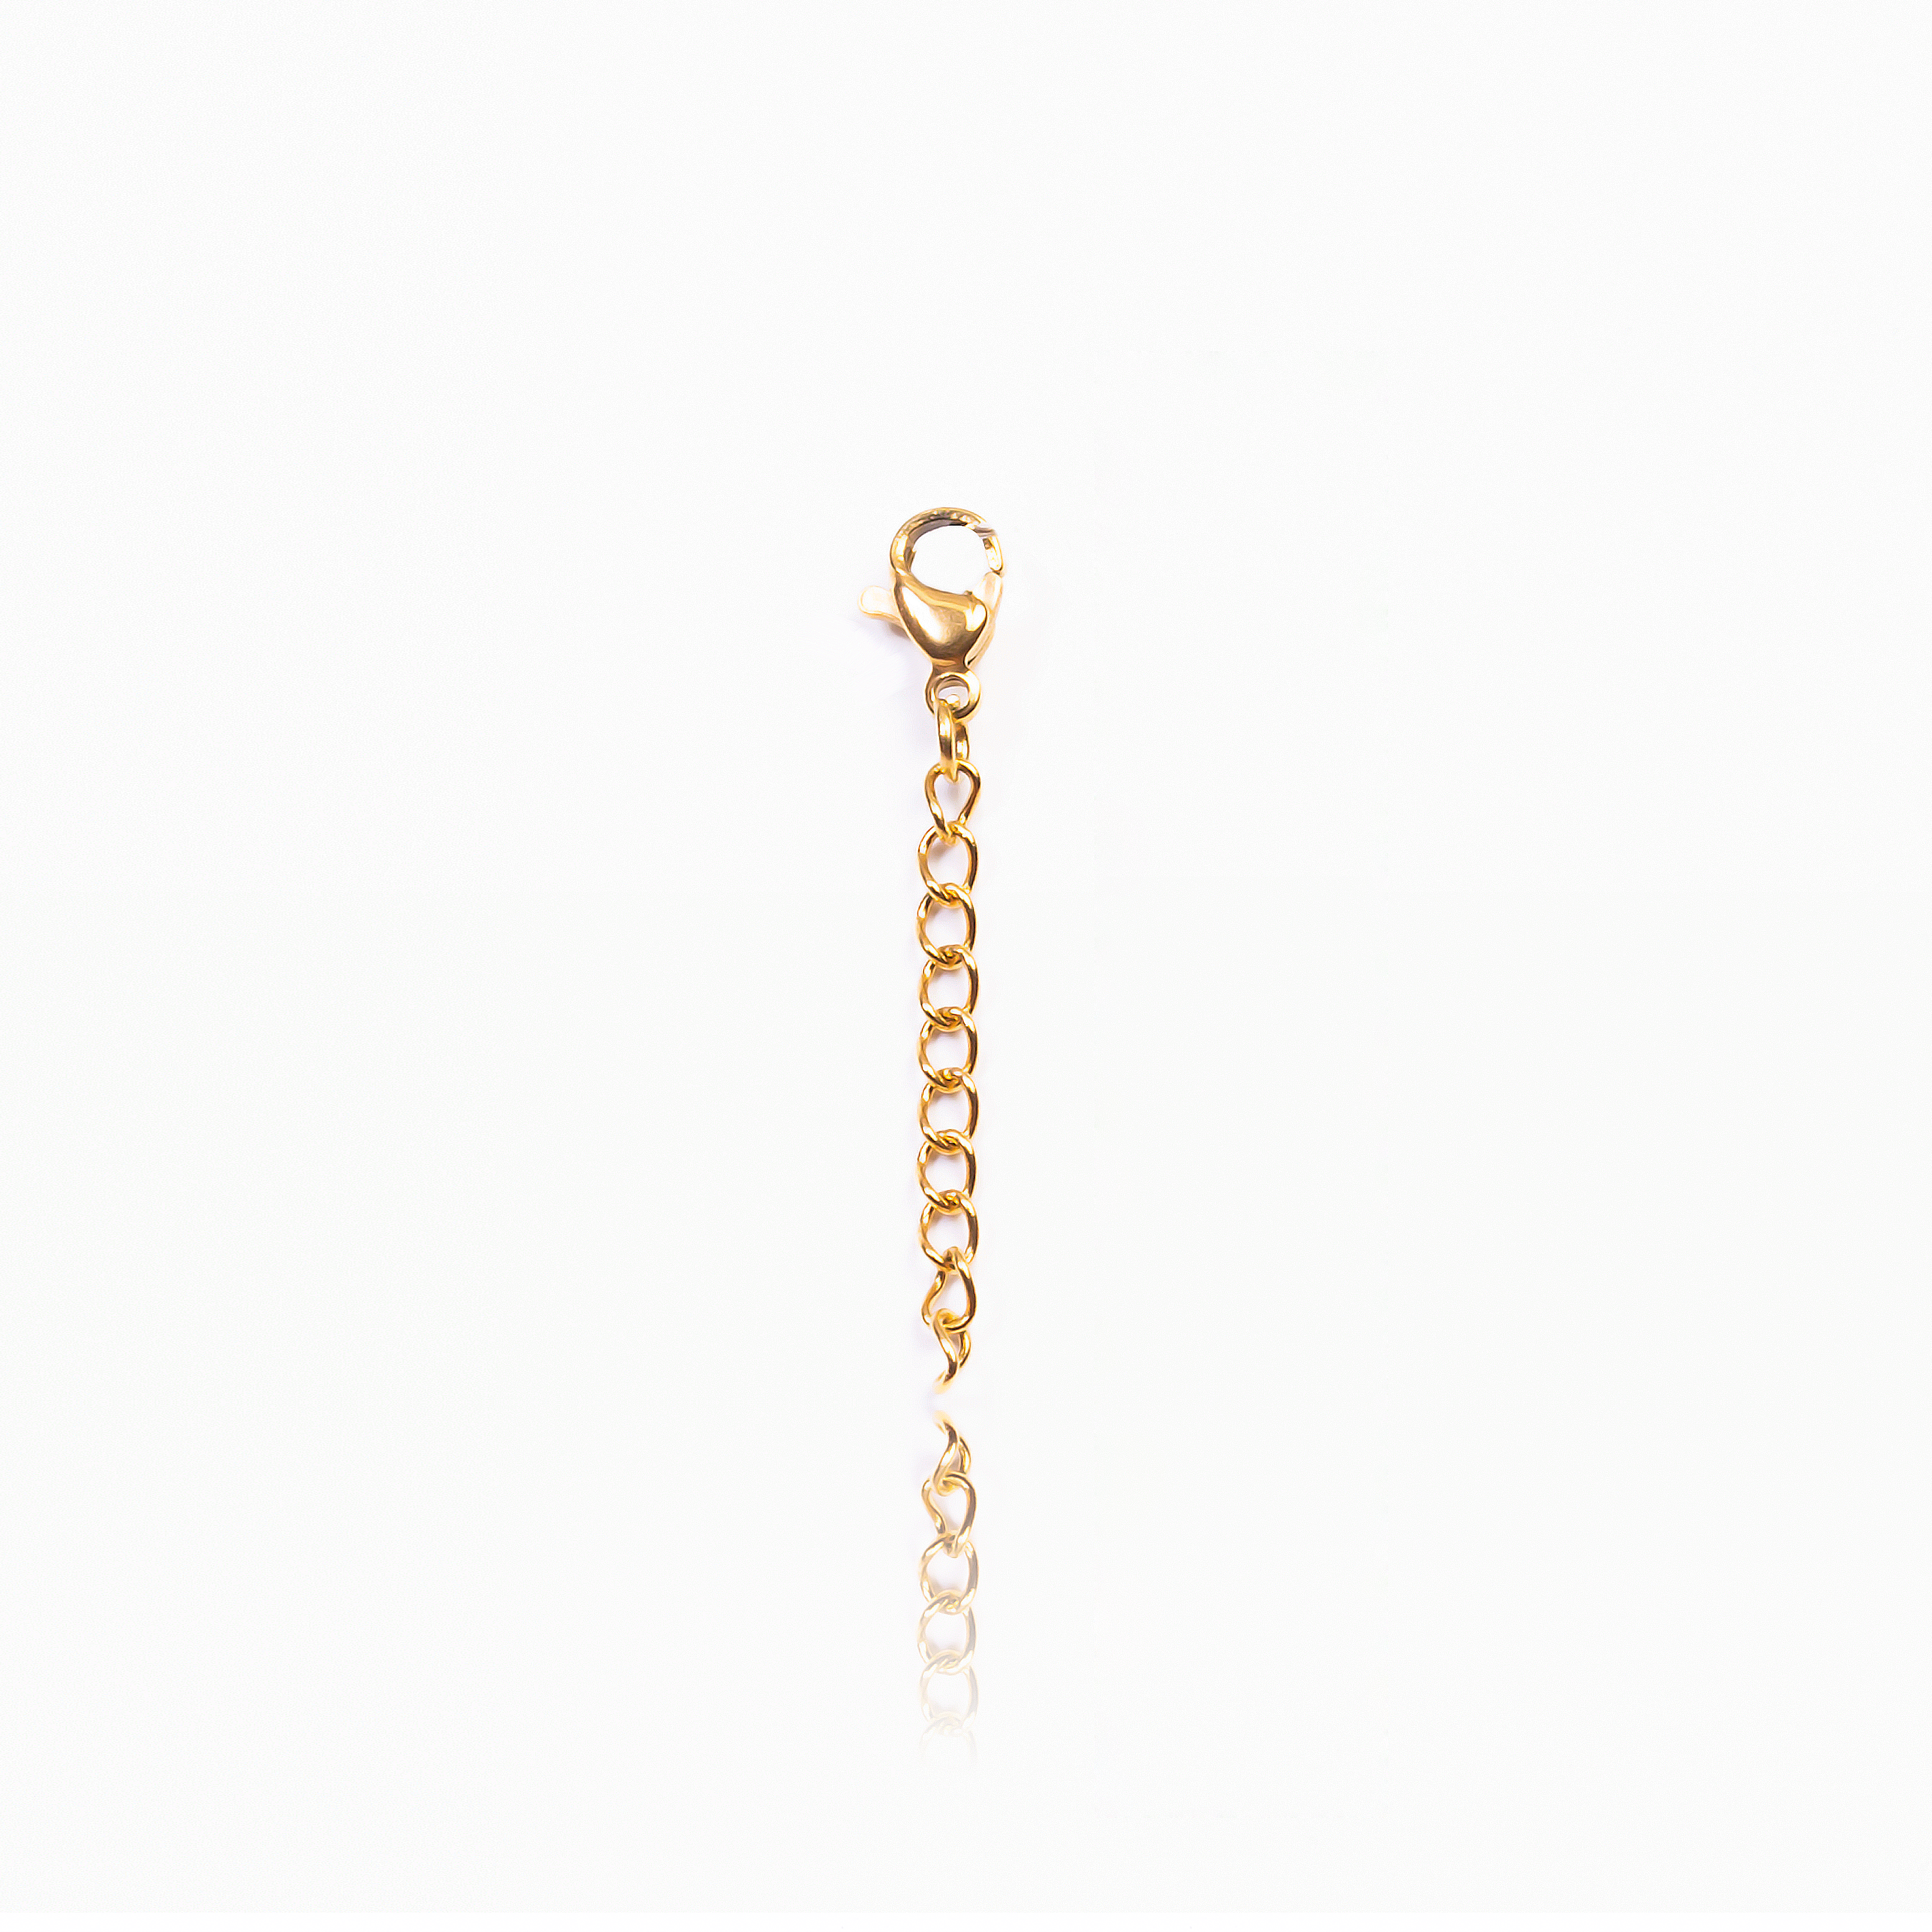 Clip the extender clasp onto the last link of your fave necklace. Perfect for when you need extra length  - 18k gold plated on stainless steel  -  length: 2 inches & 4 inches available 